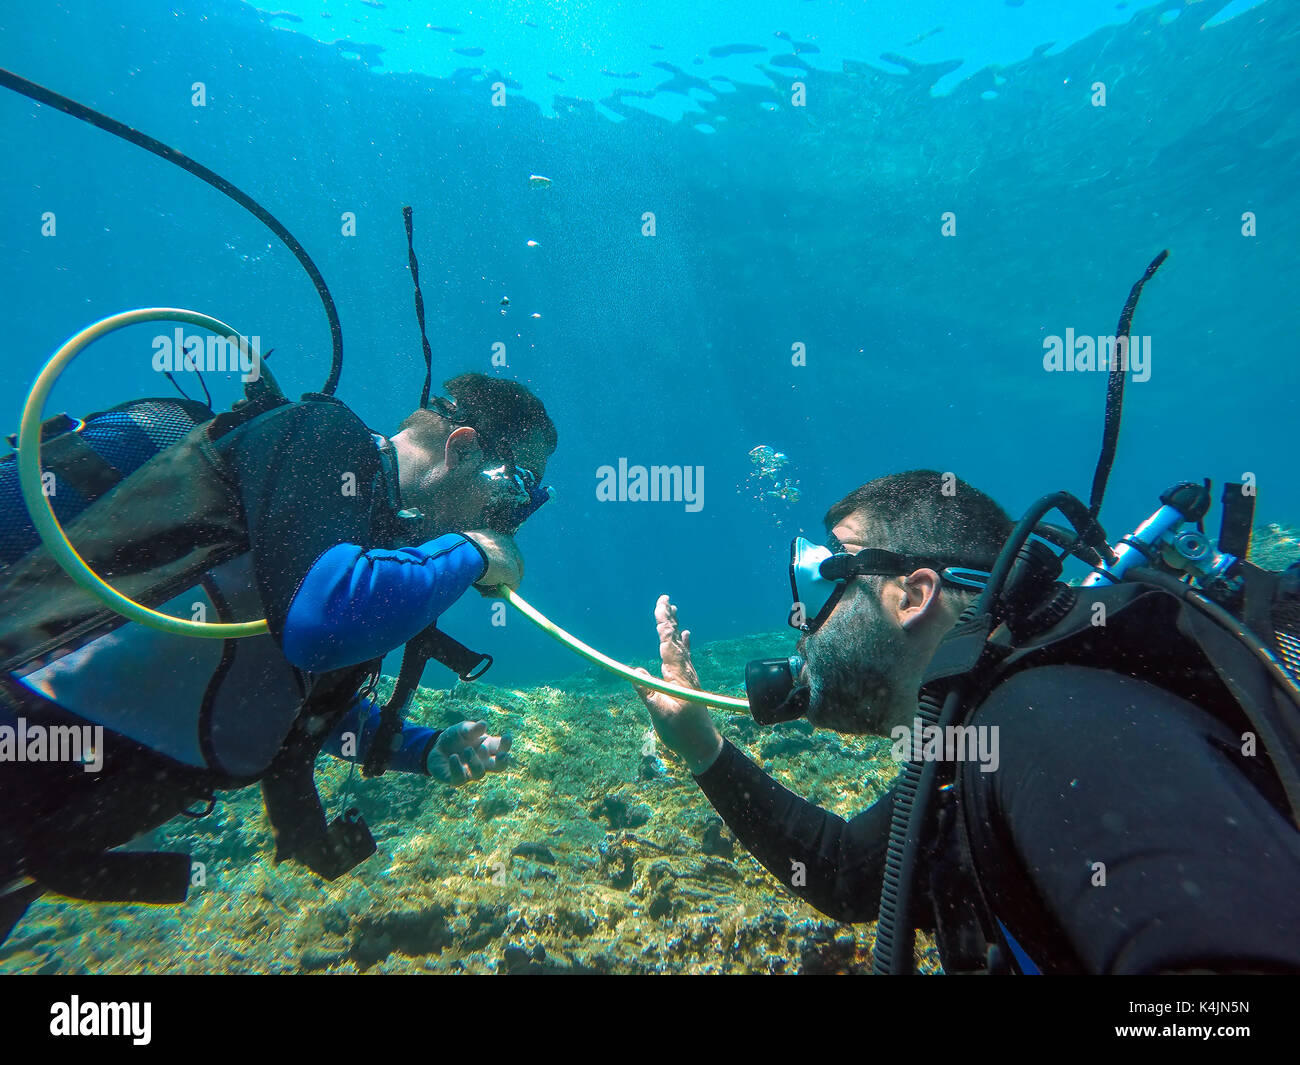 A helpful dive buddy shares his air. Scuba diver using hand gestures to communicate with his dive buddy. Stock Photo